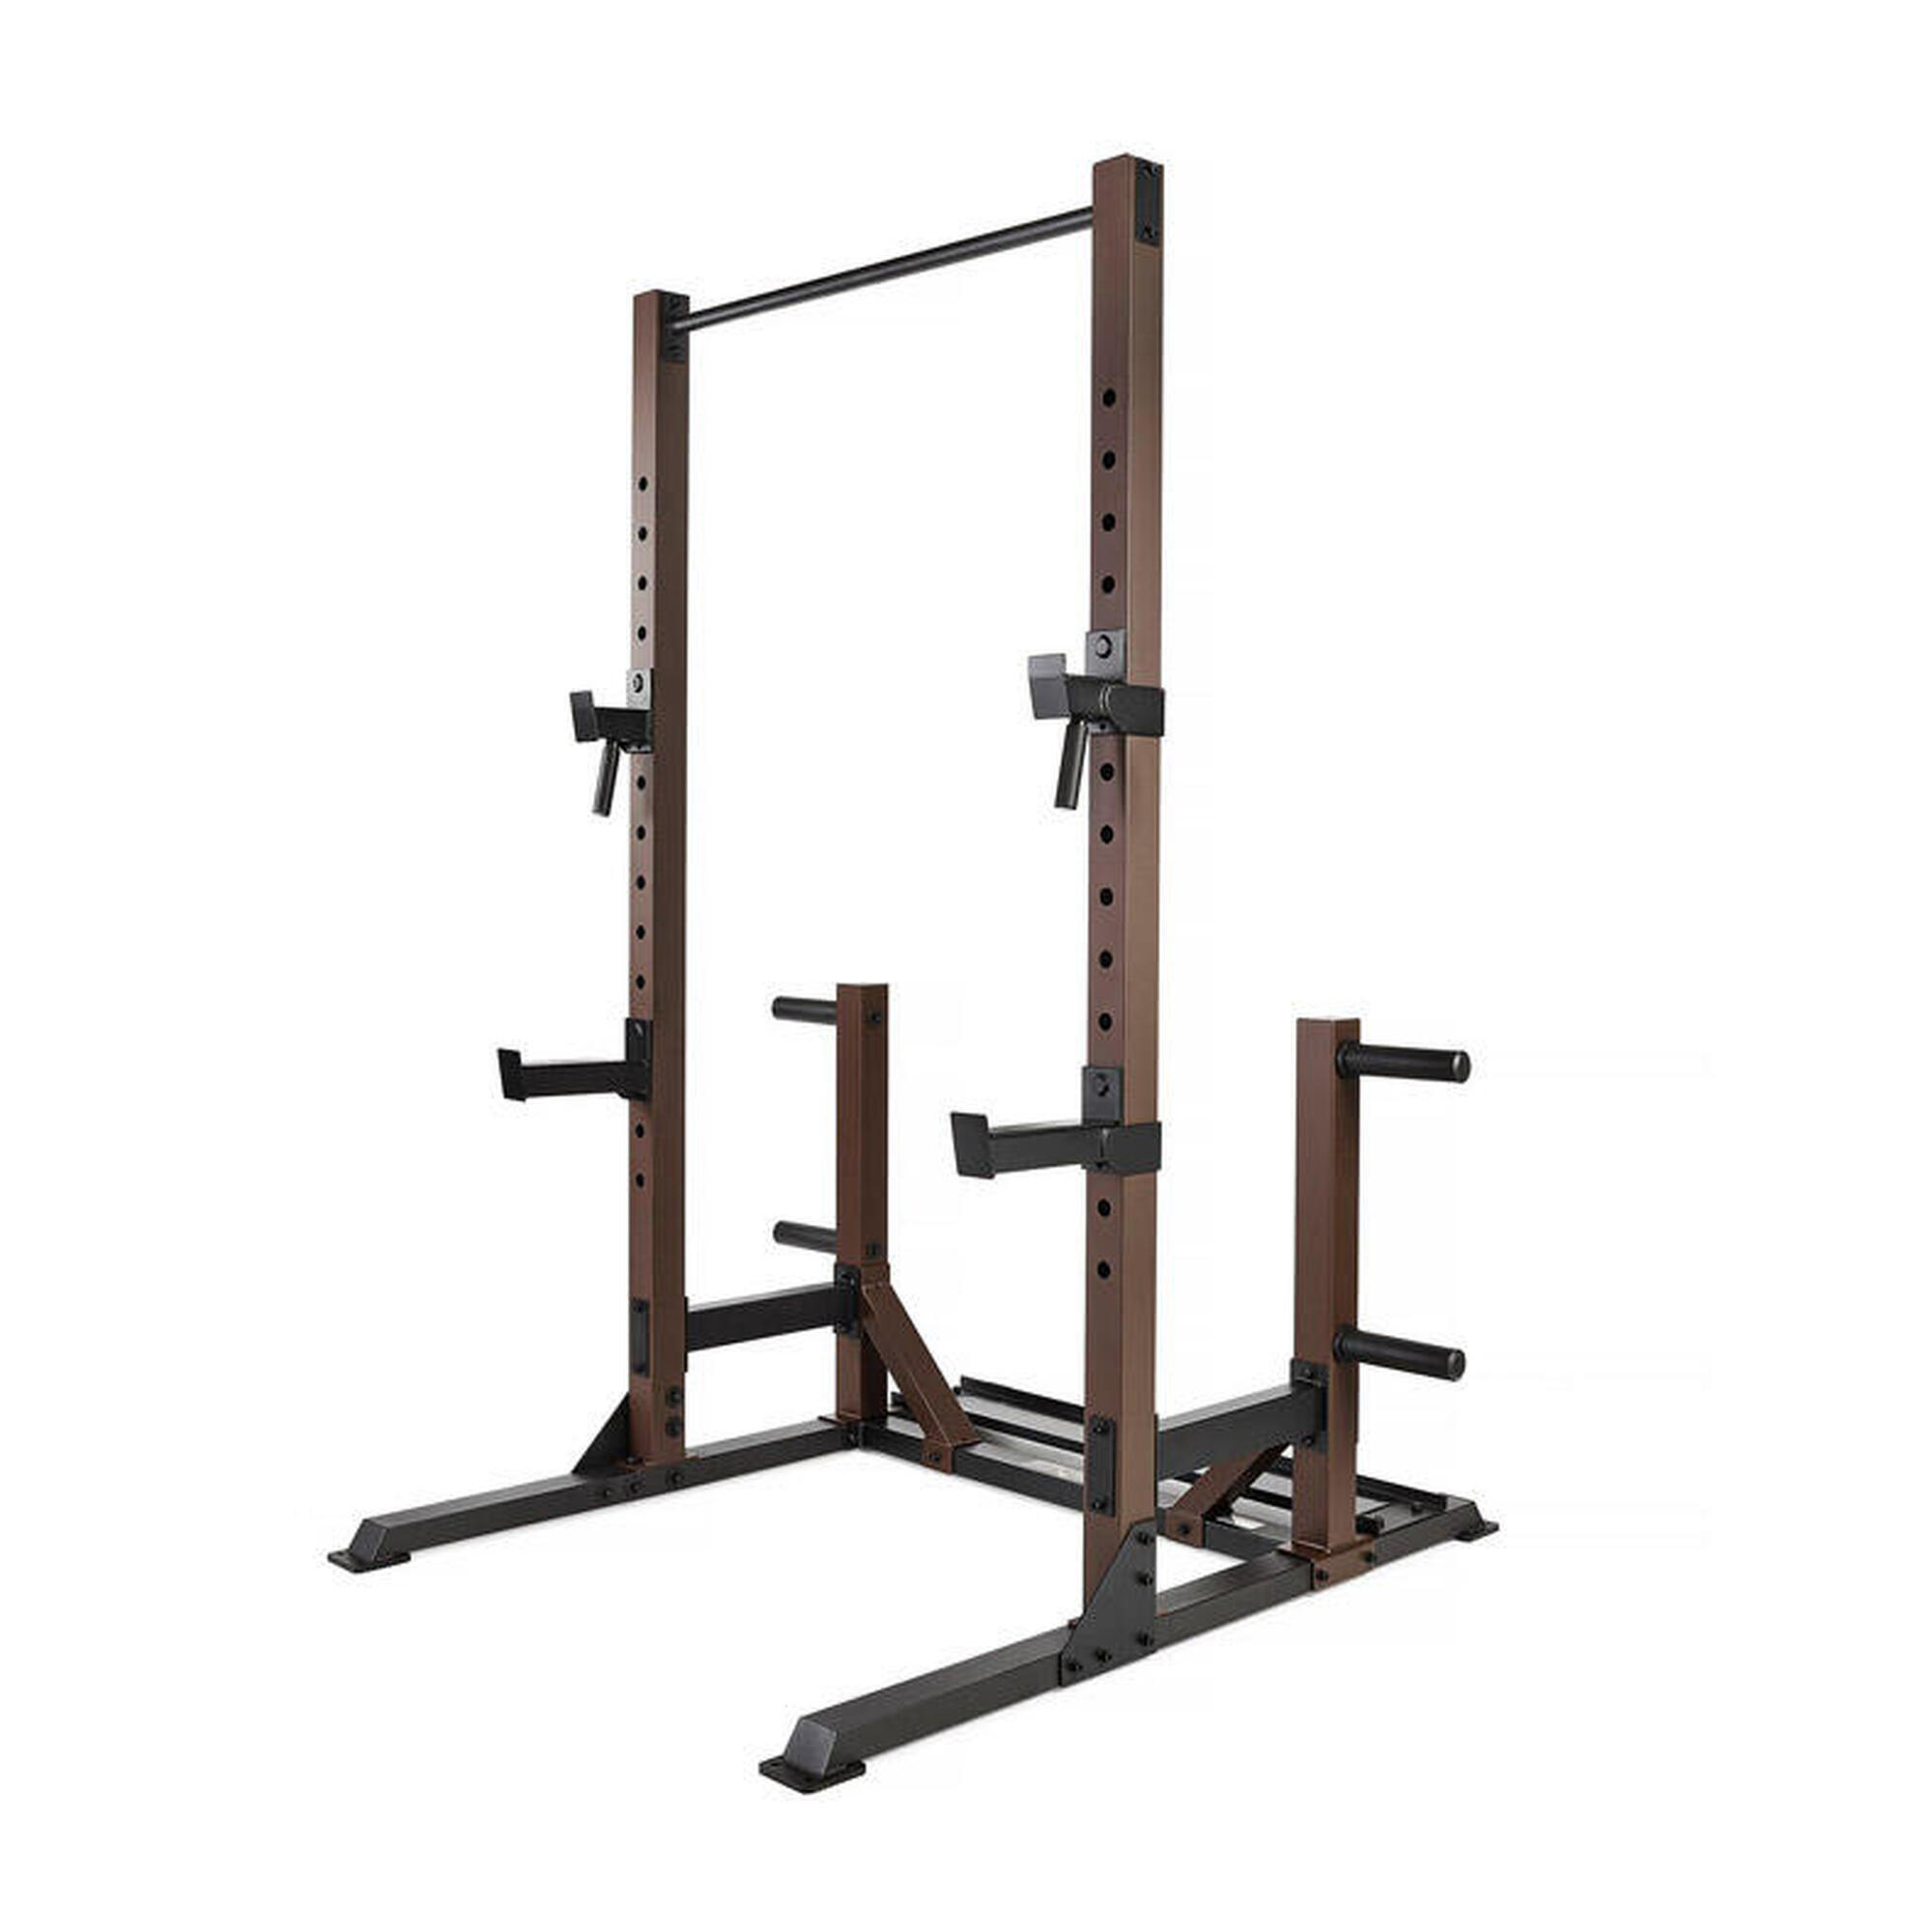 MARCY STEELBODY STB-98010 LIGHT COMMERCIAL POWER RACK/UTILITY WEIGHT TRAINER